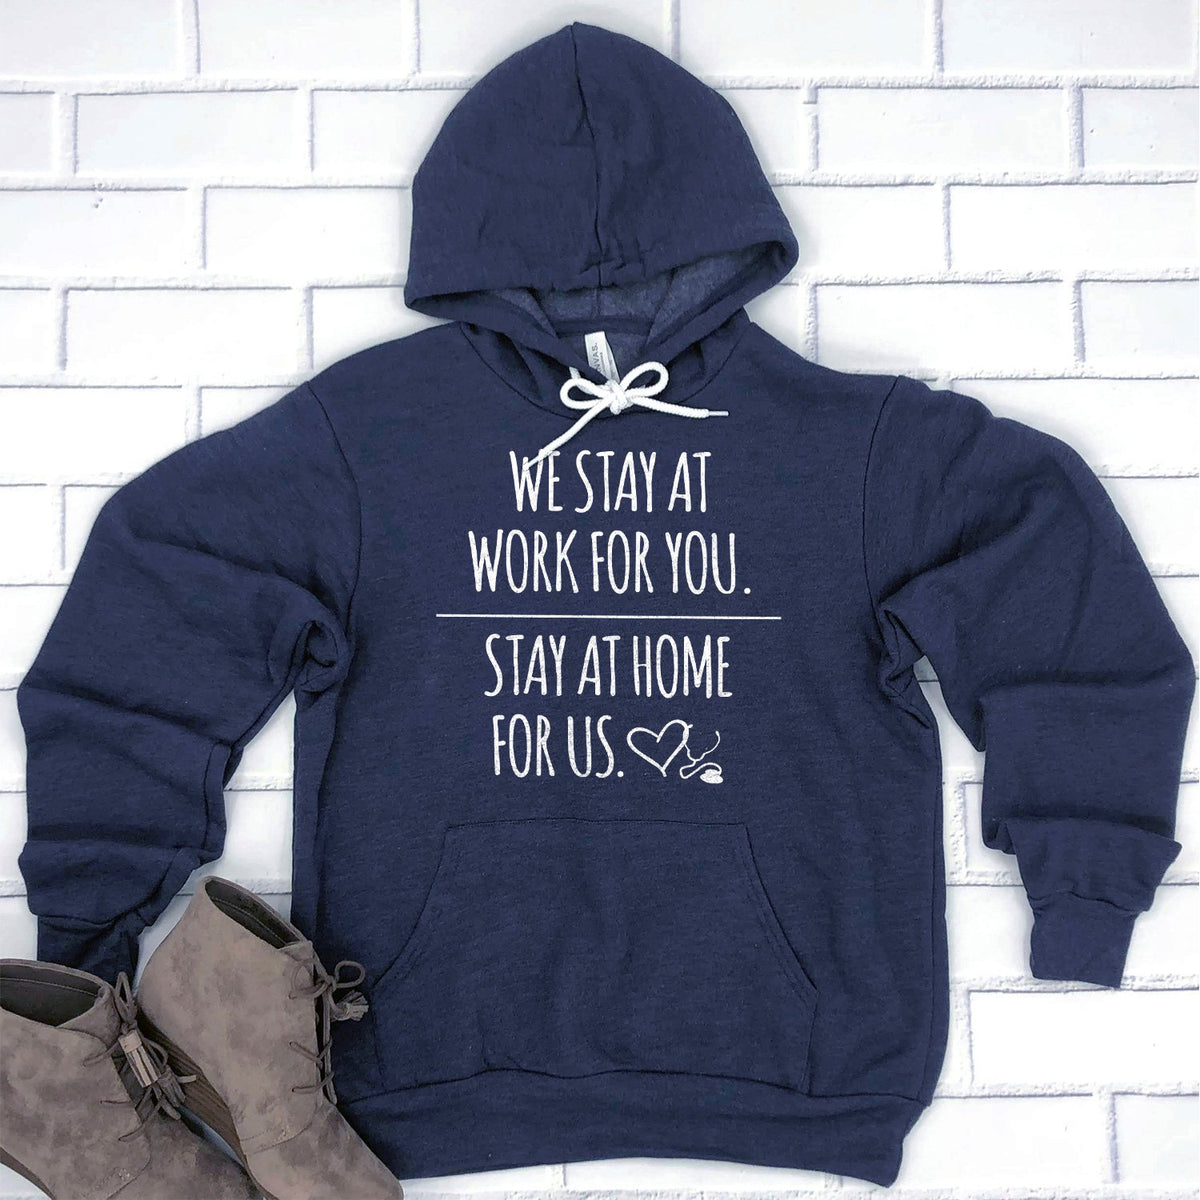 We Stay at Work for You Stay at Home for Us - Hoodie Sweatshirt